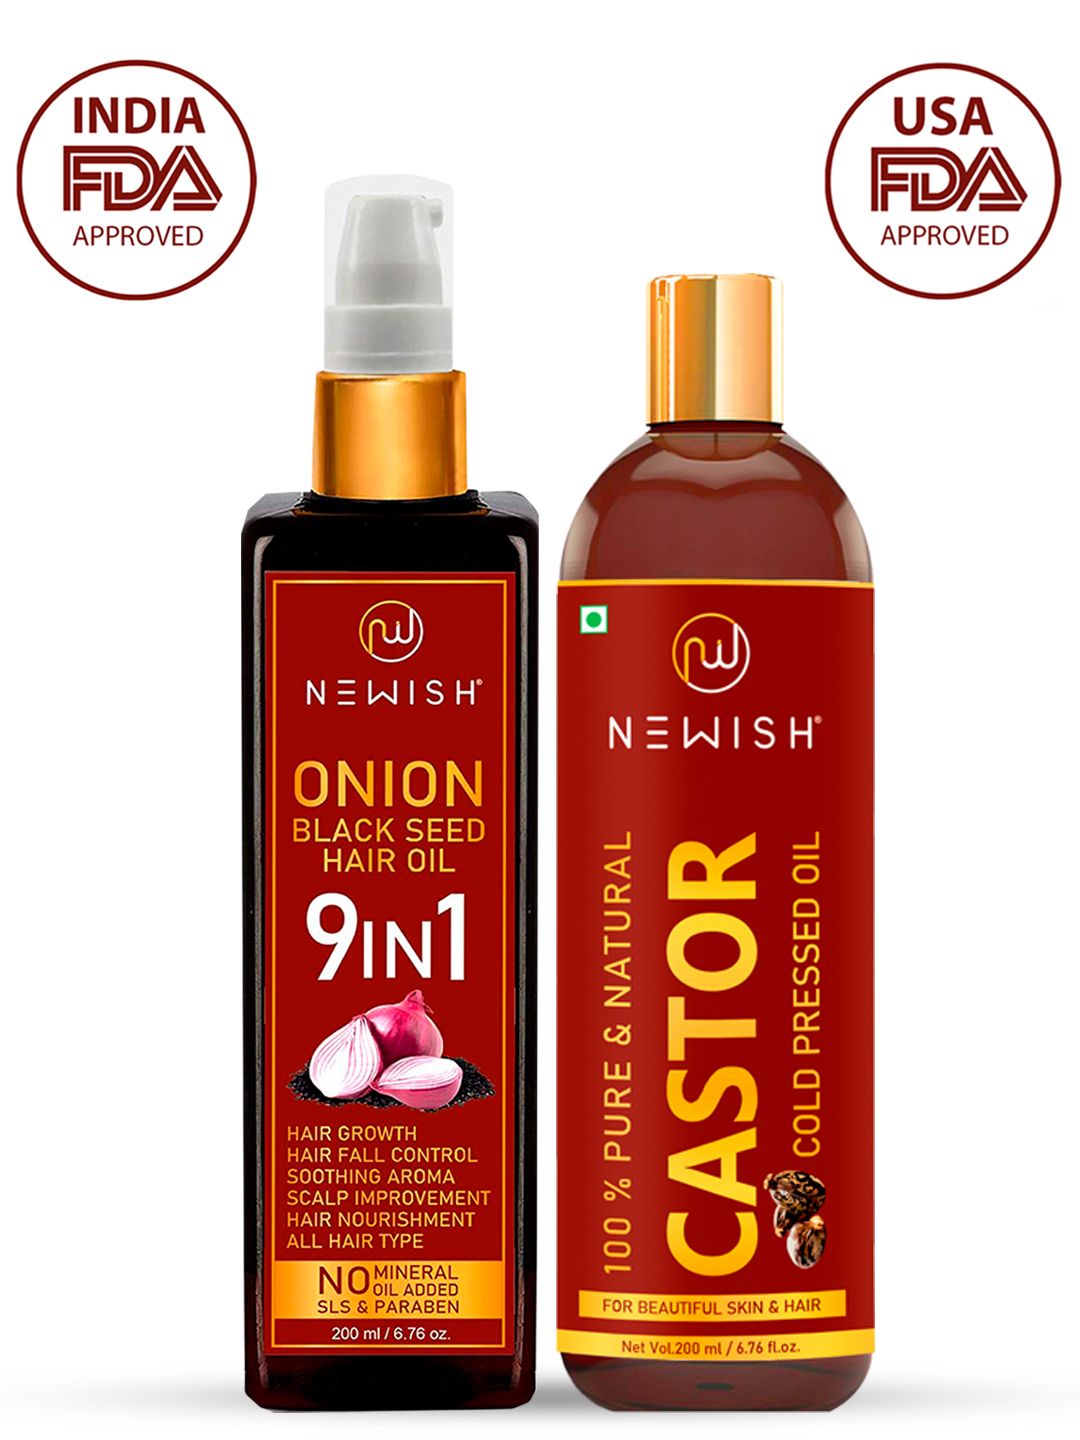 NEWISH Red Onion Black Seed Oil & Newish Organic Cold Pressed Castor Oil Price in India